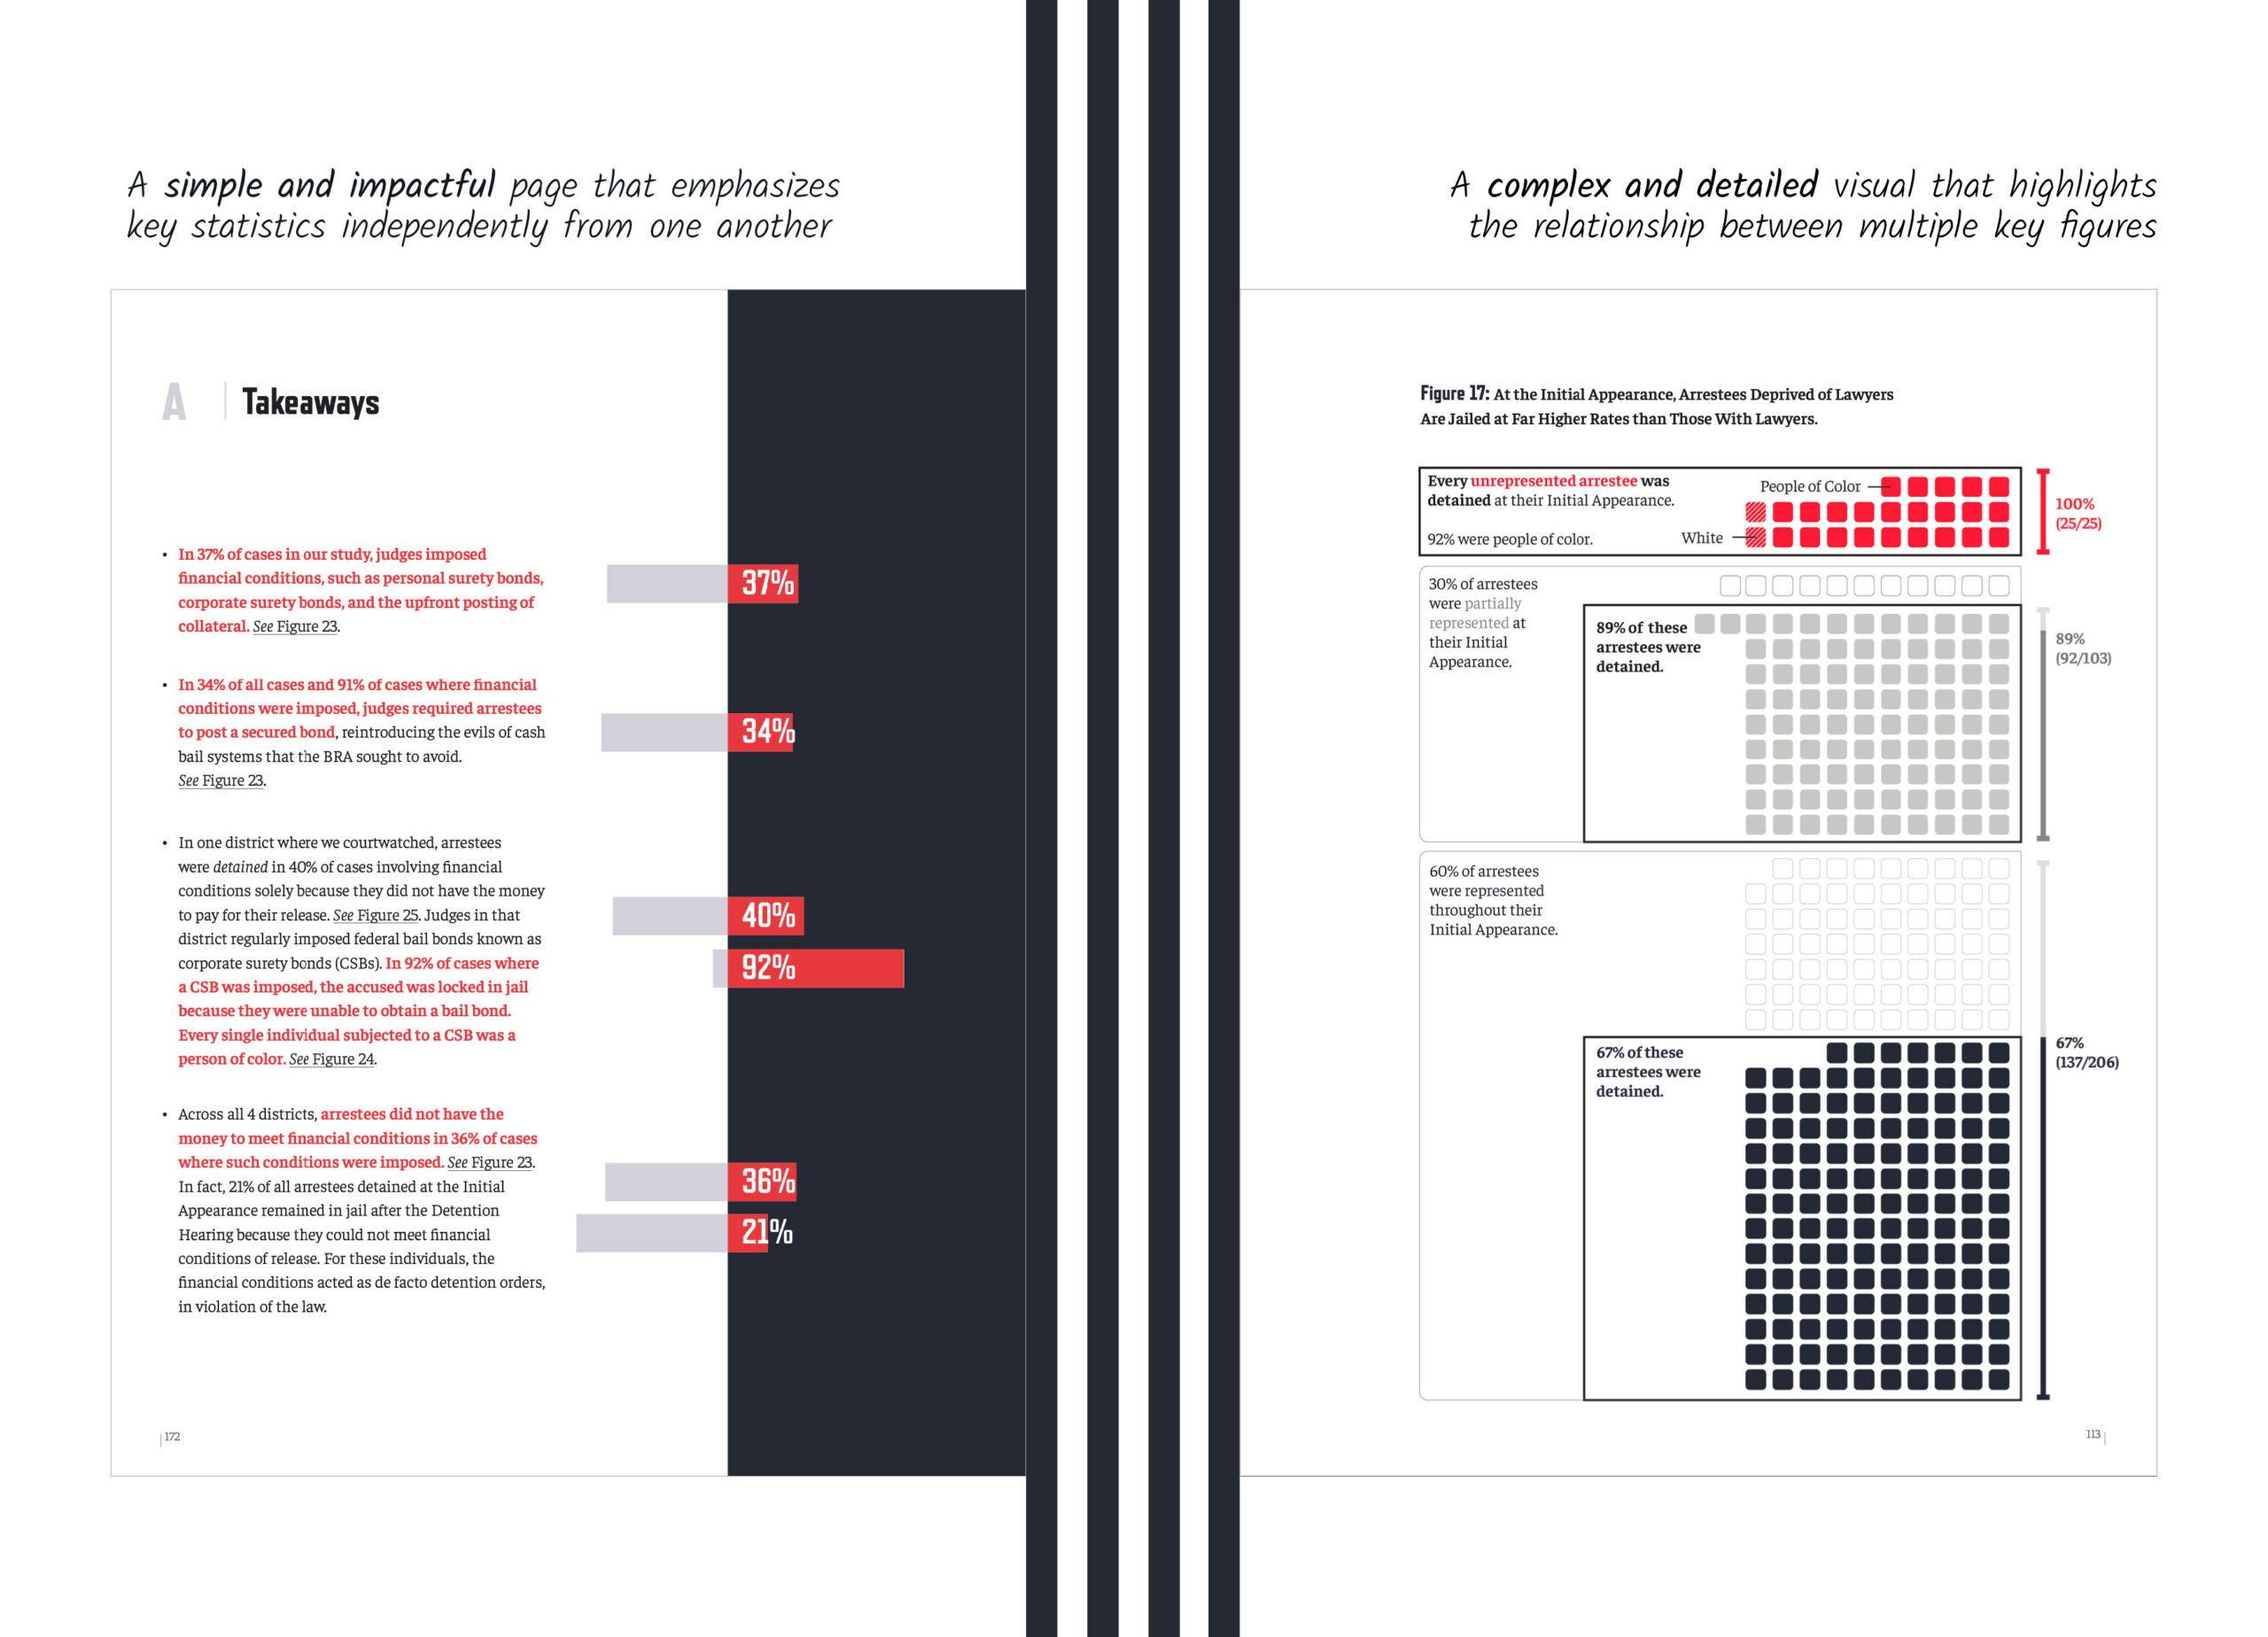 Two extremes example of visuals and layout in the report that achieve different goals: impact on the left and nuance on the right.